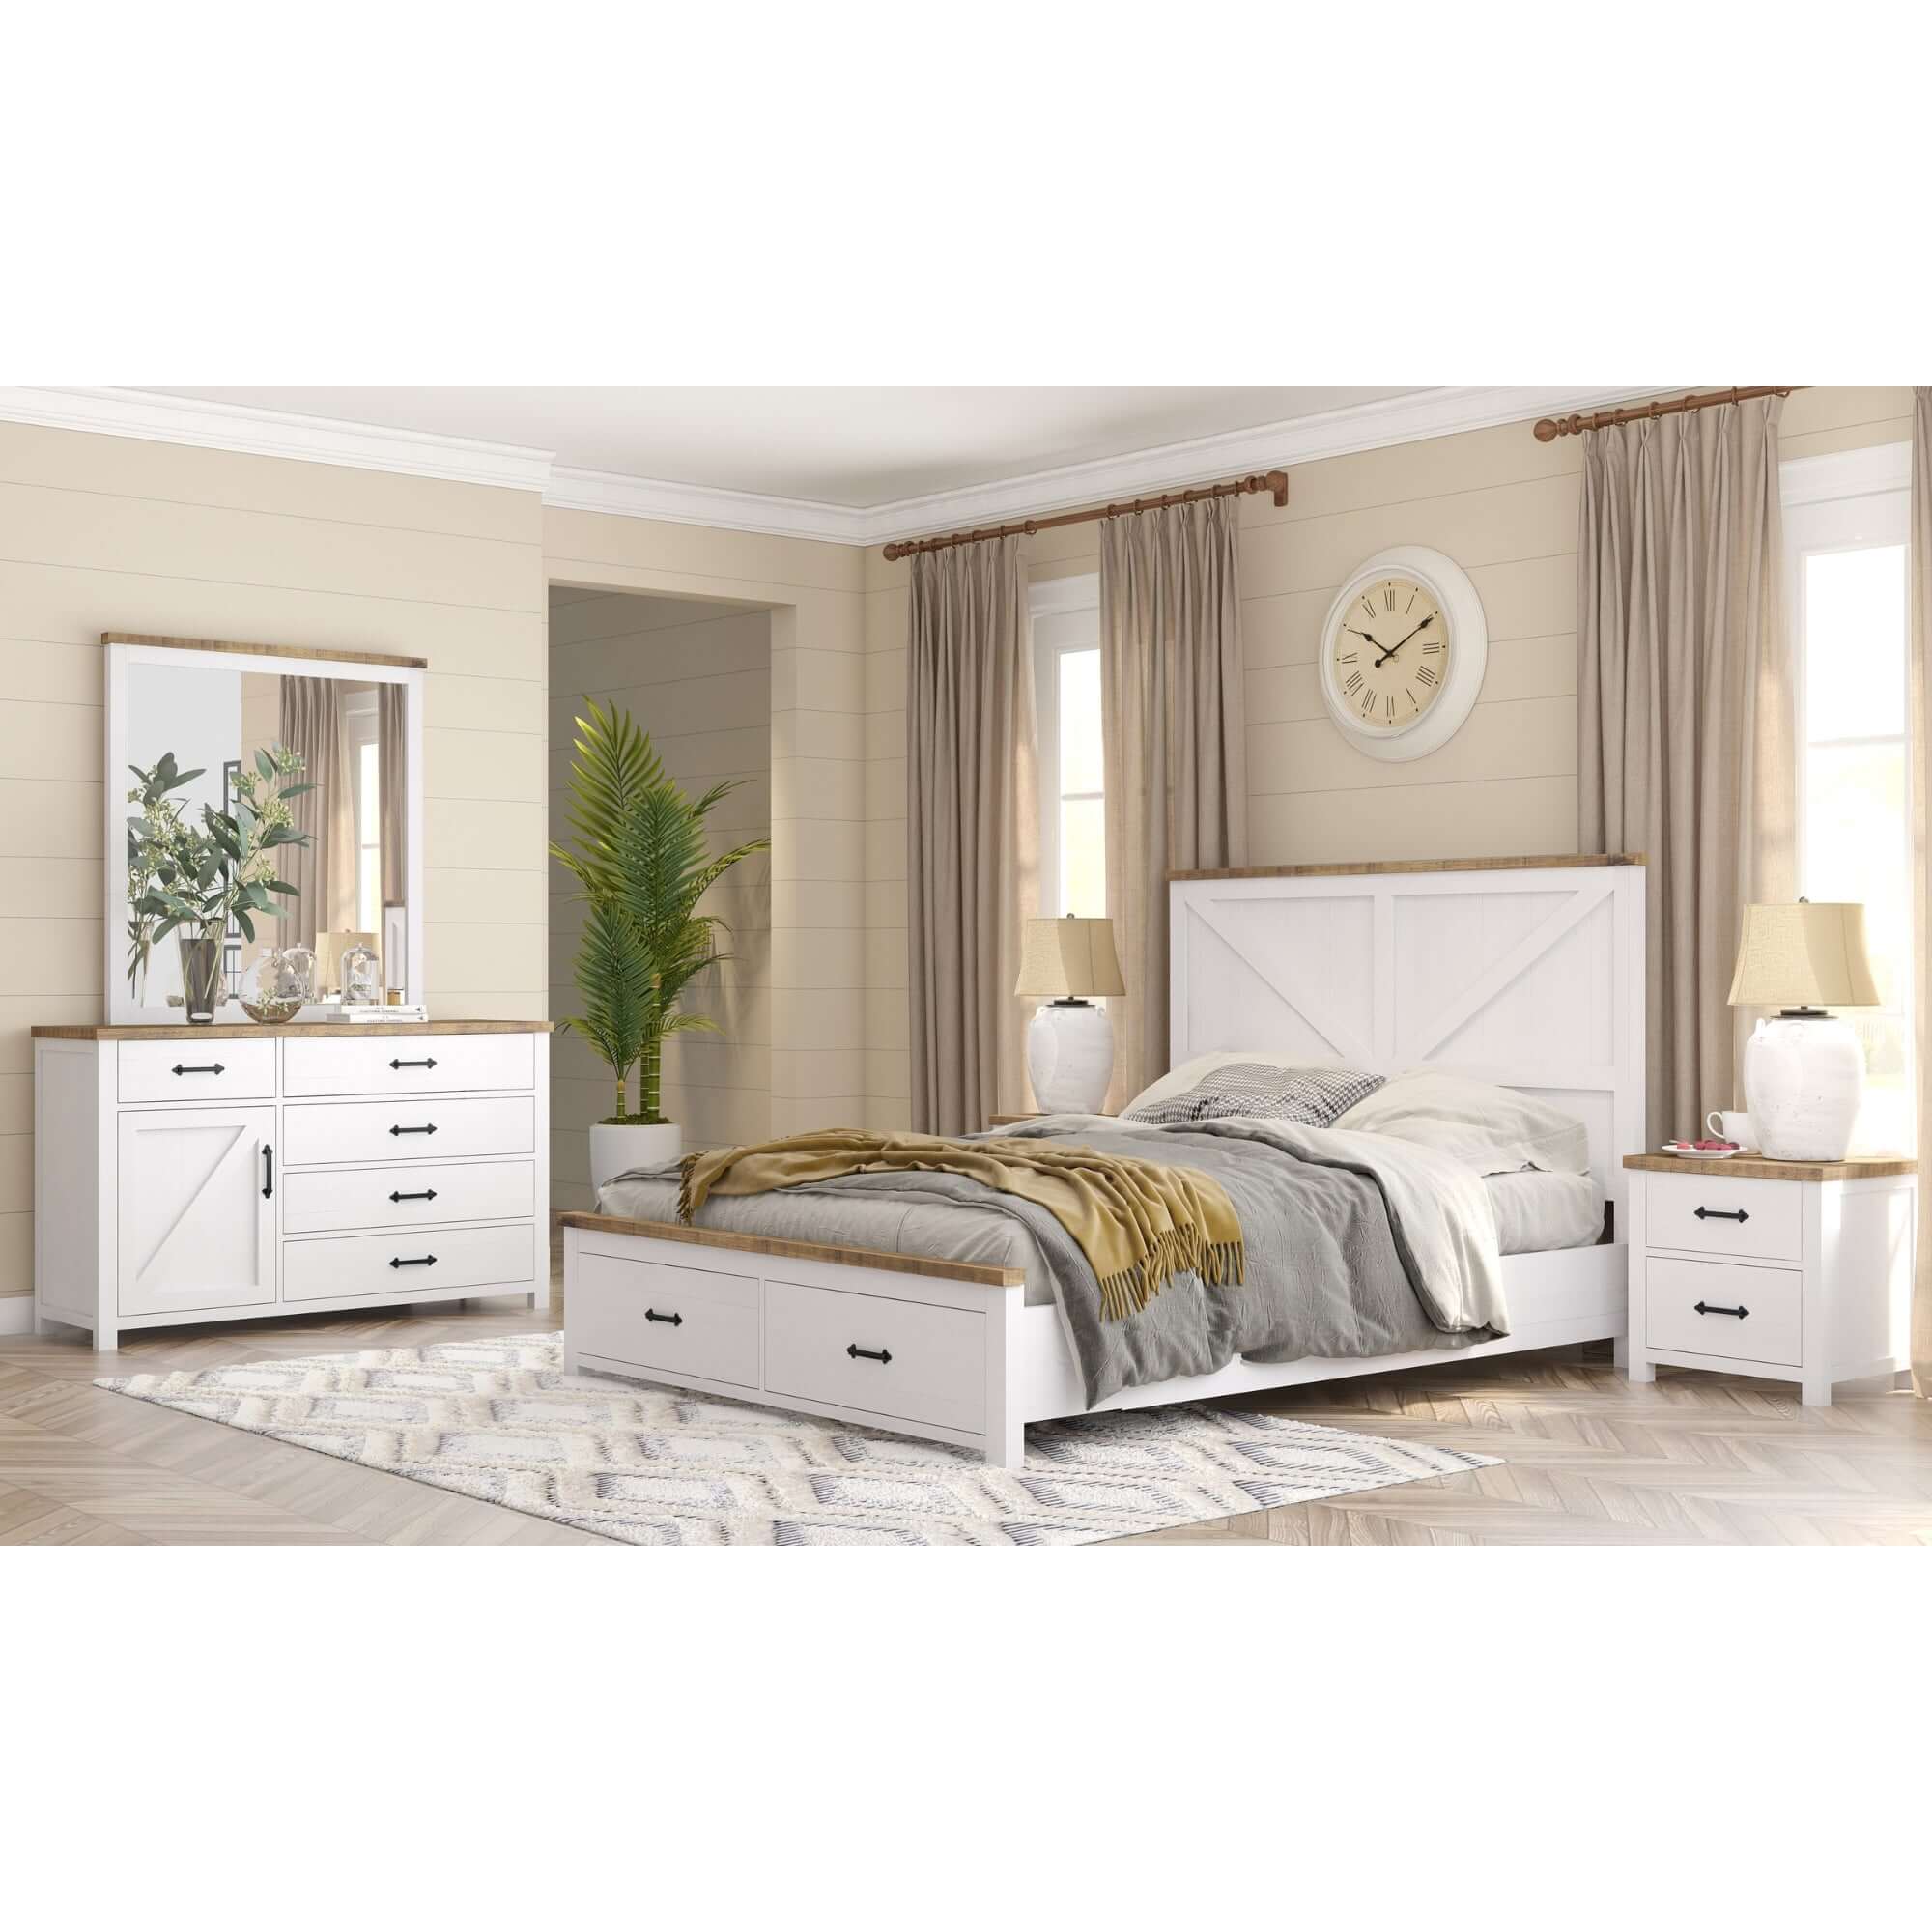 Grandy 2-Drawer Bedside Tables - White & Brown-Upinteriors